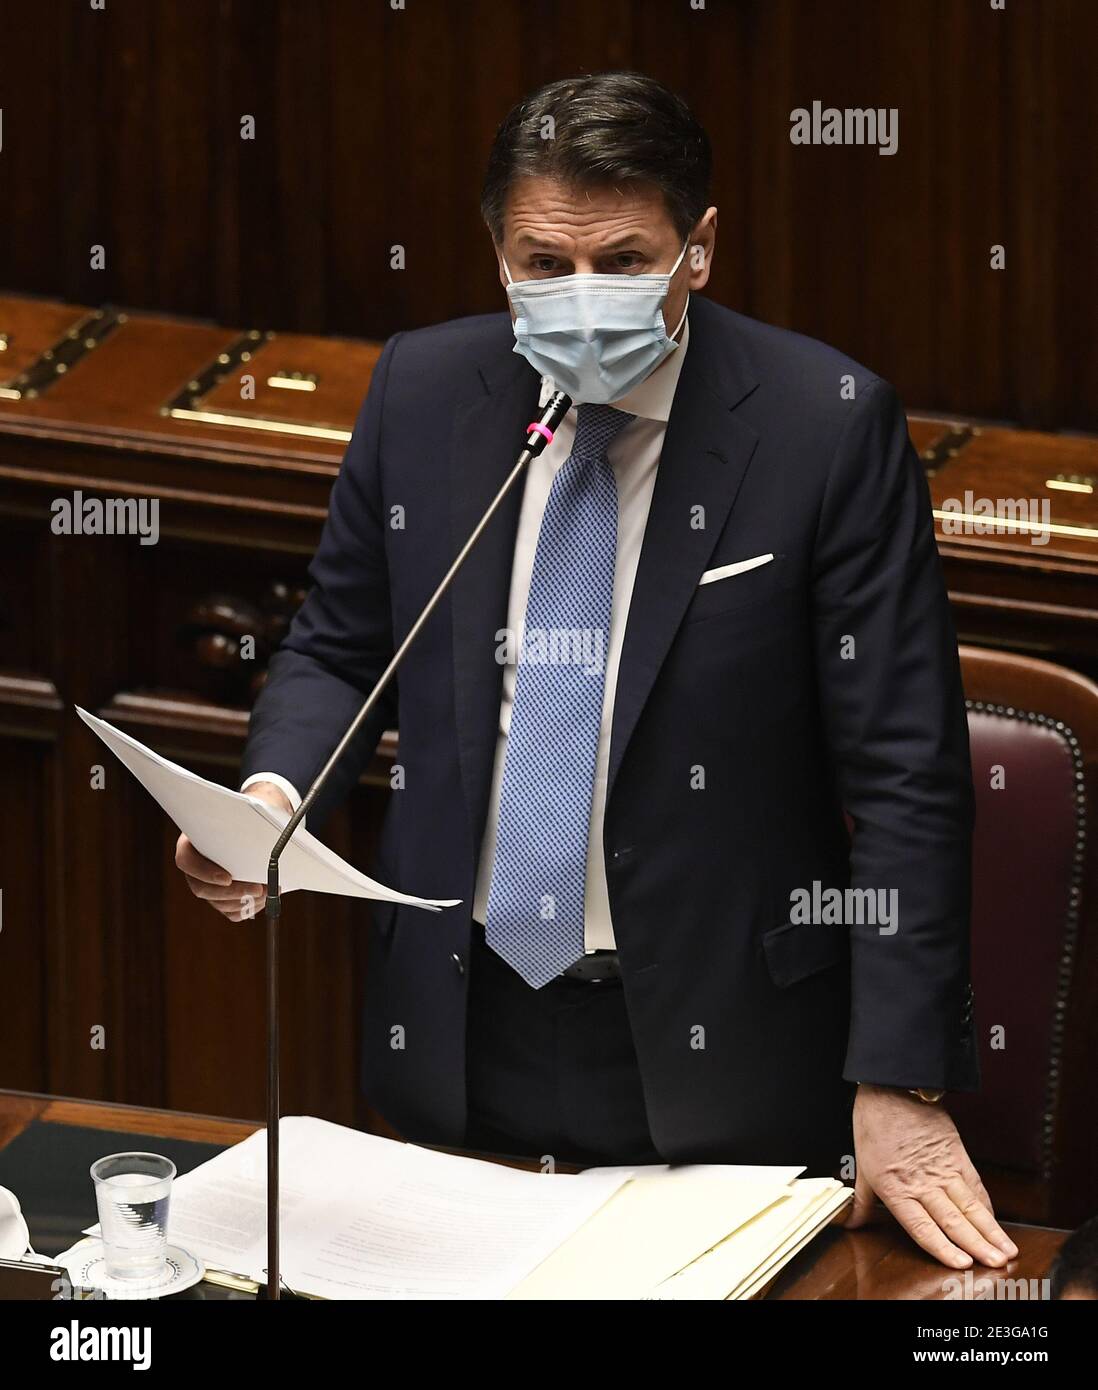 Rome. 19th Jan, 2021. Italian Prime Minister Giuseppe Conte addresses the lower house of Parliament in Rome, Italy, on Jan. 18, 2021. Italian Prime Minister Giuseppe Conte won a confidence vote at the Lower House of Parliament on Monday by 321 in favor, 259 against and 27 abstaining. Conte sought the confidence vote after former Prime Minister Matteo Renzi, now a senator who leads the Italia Viva party, pulled out of the ruling majority last week, sparking a government crisis. Credit: Xinhua/Alamy Live News Stock Photo